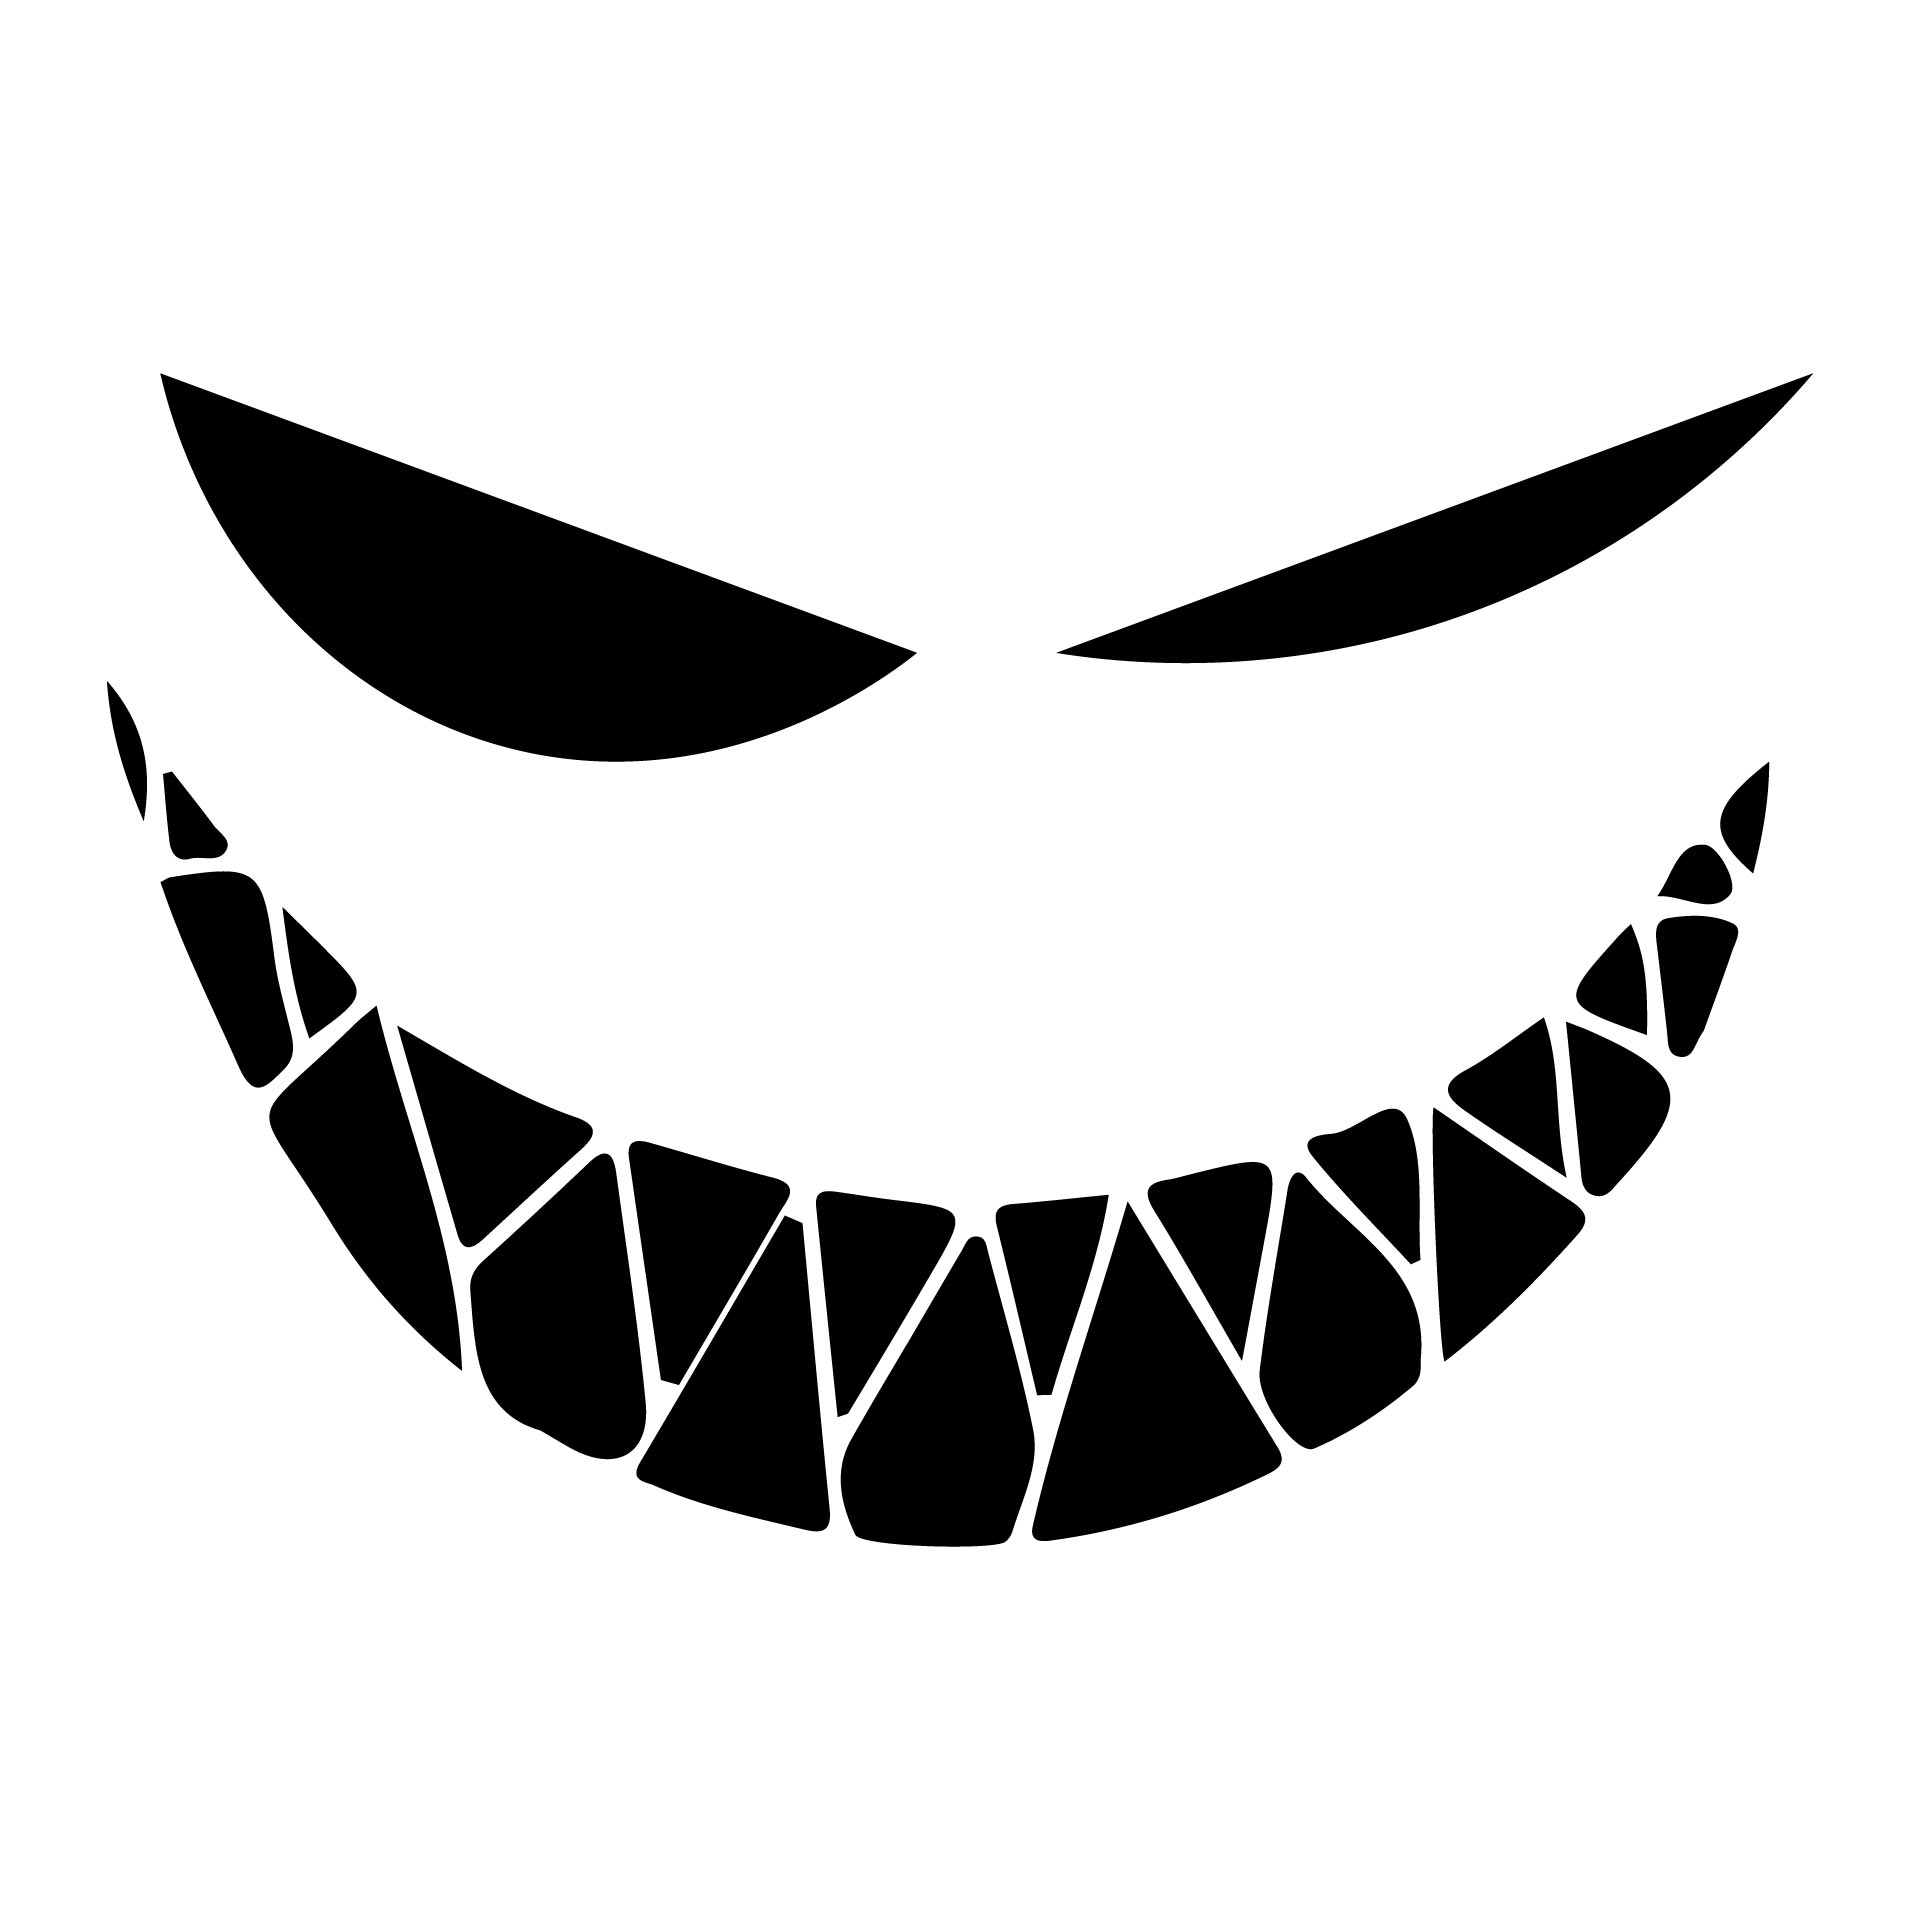 10-best-ghost-face-template-printable-pdf-for-free-at-printablee